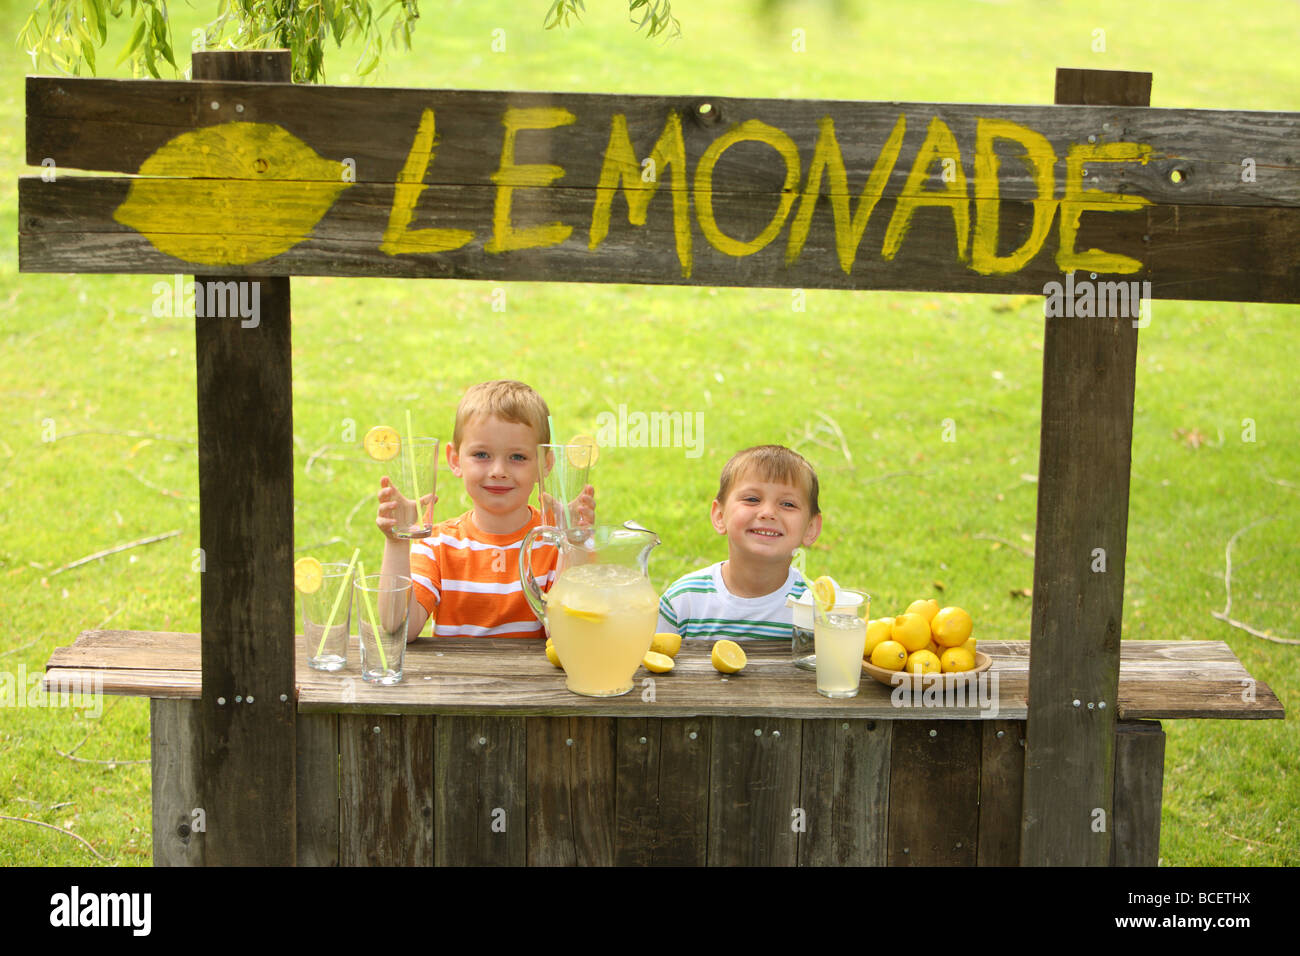 Two young boys at lemonade stand Stock Photo